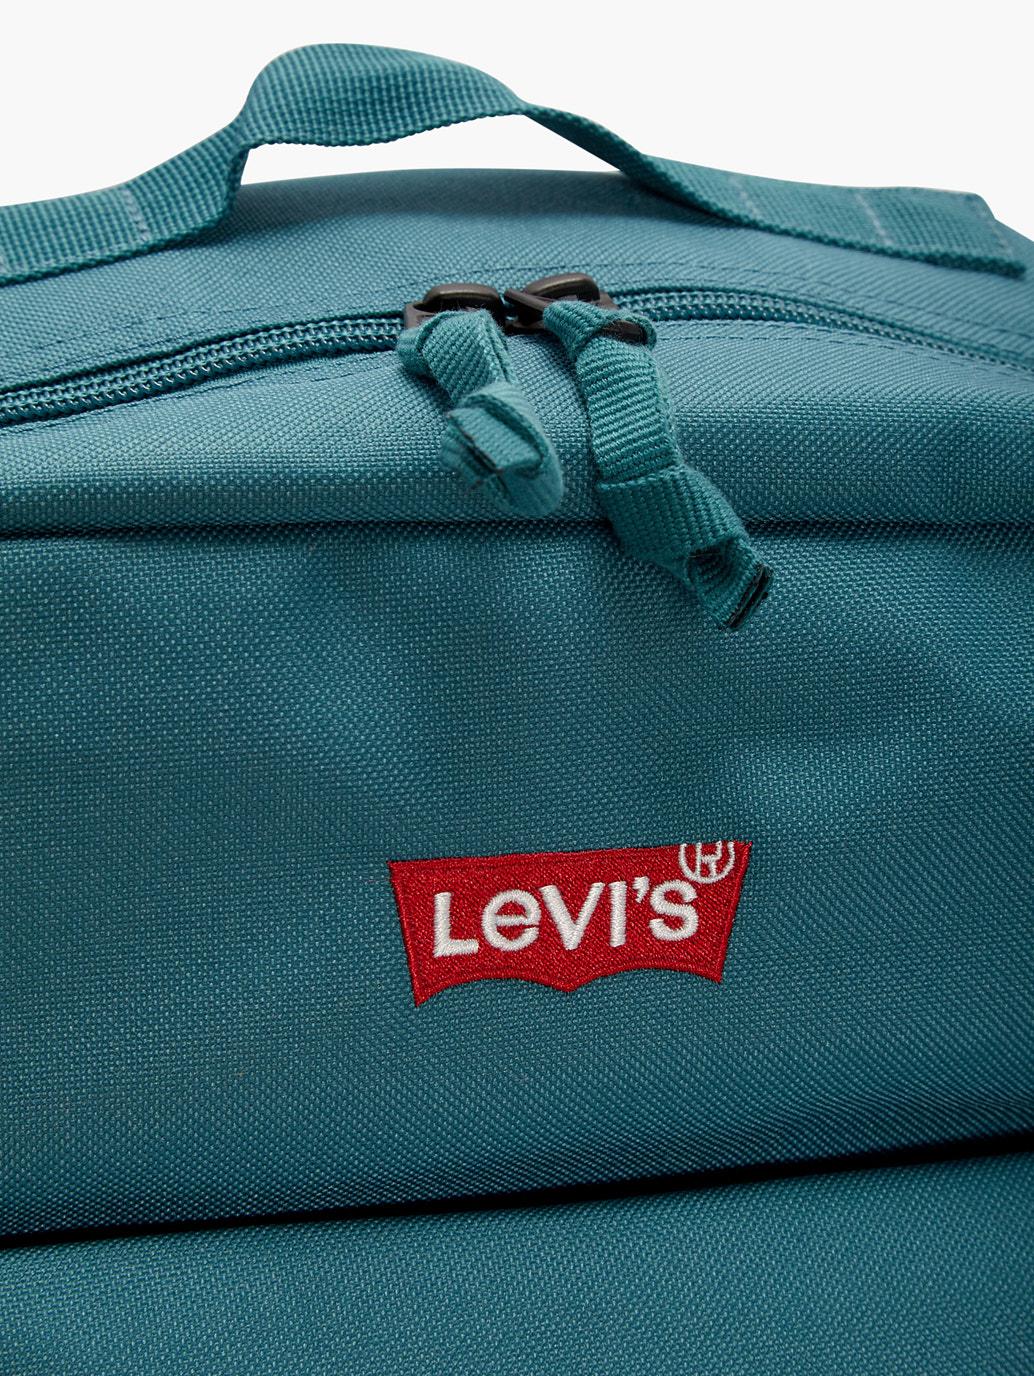 levis malaysia mens l pack standard issue D54630002 13 Details